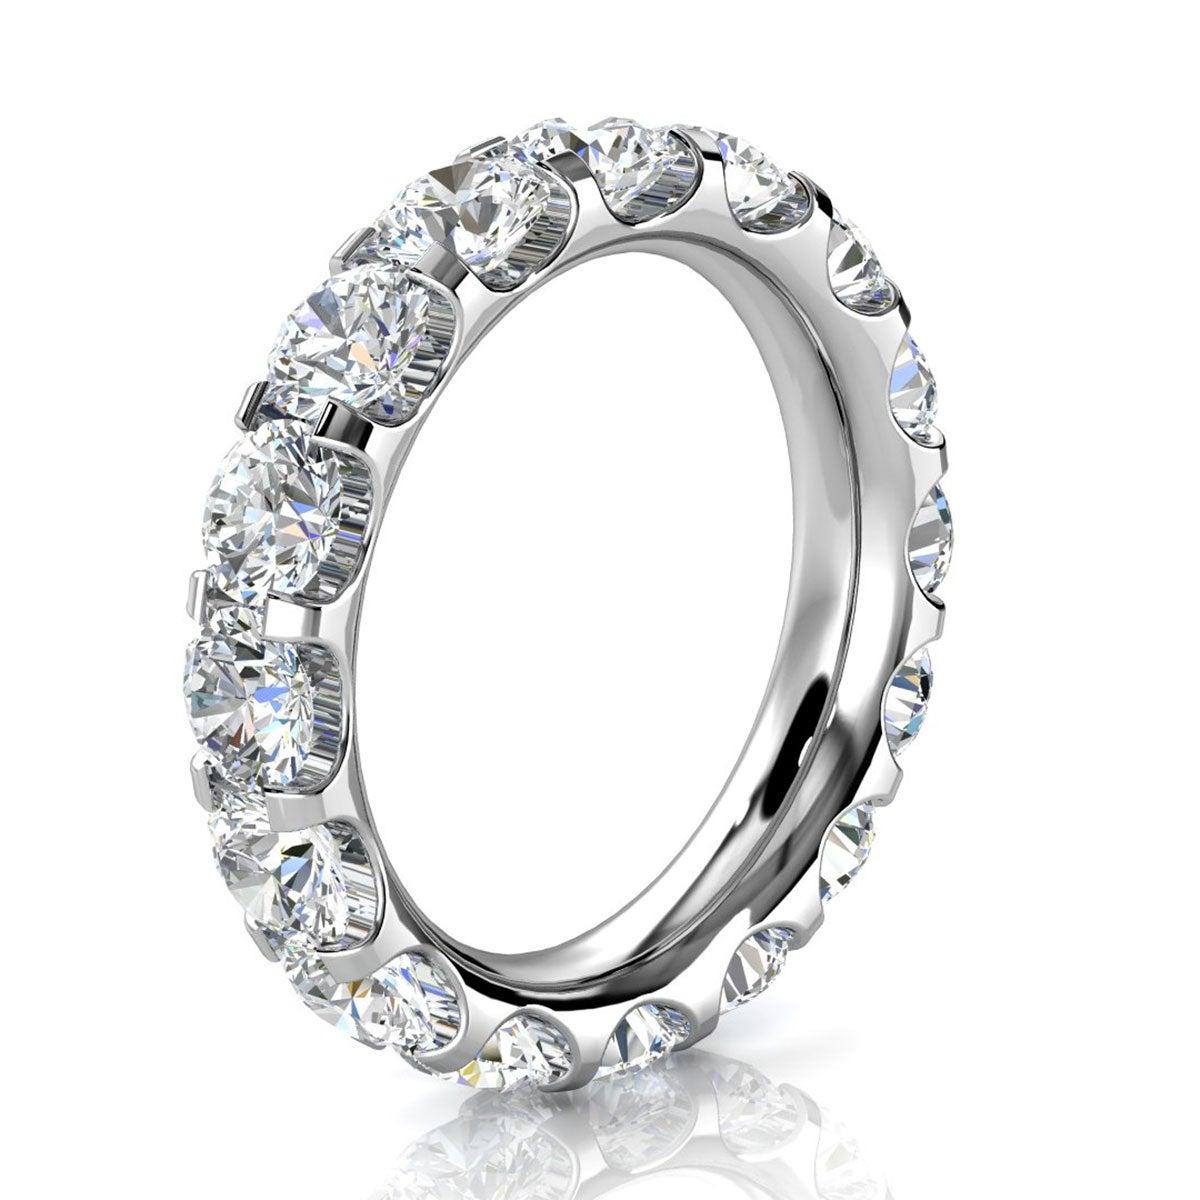 For Sale:  14K White Gold Viola Eternity Micro-Prong Diamond Ring '4 Ct. Tw' 2